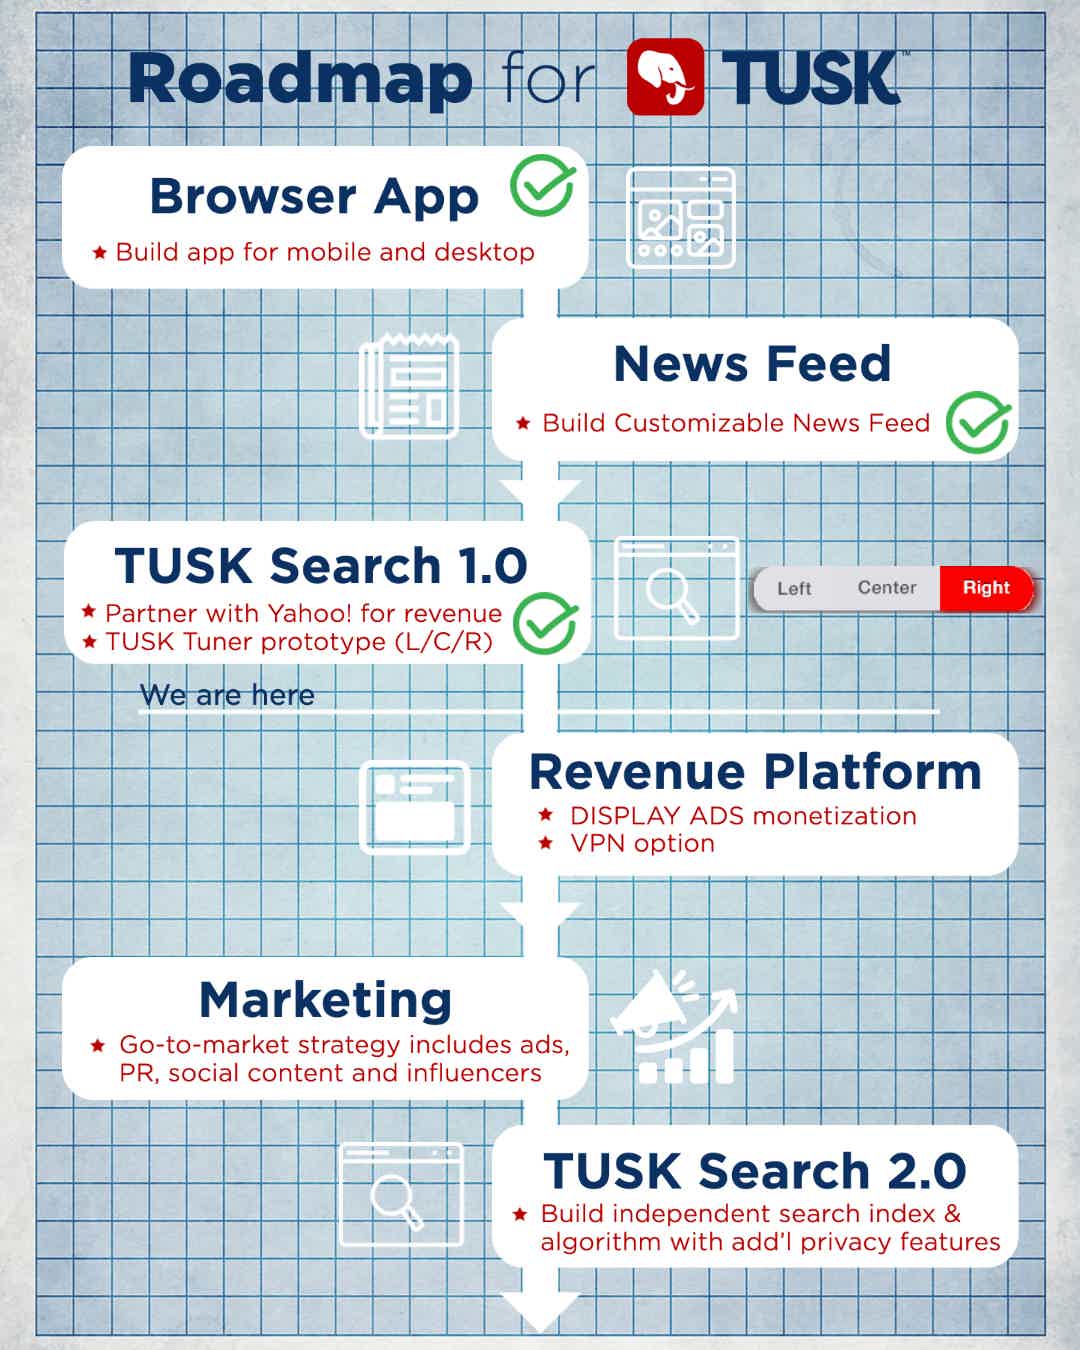 Roadmap for TUSK includes Display Ads, Marketing and Search v1.0 & v2.0. * Additional funding may be needed for TUSK Search 2.0.